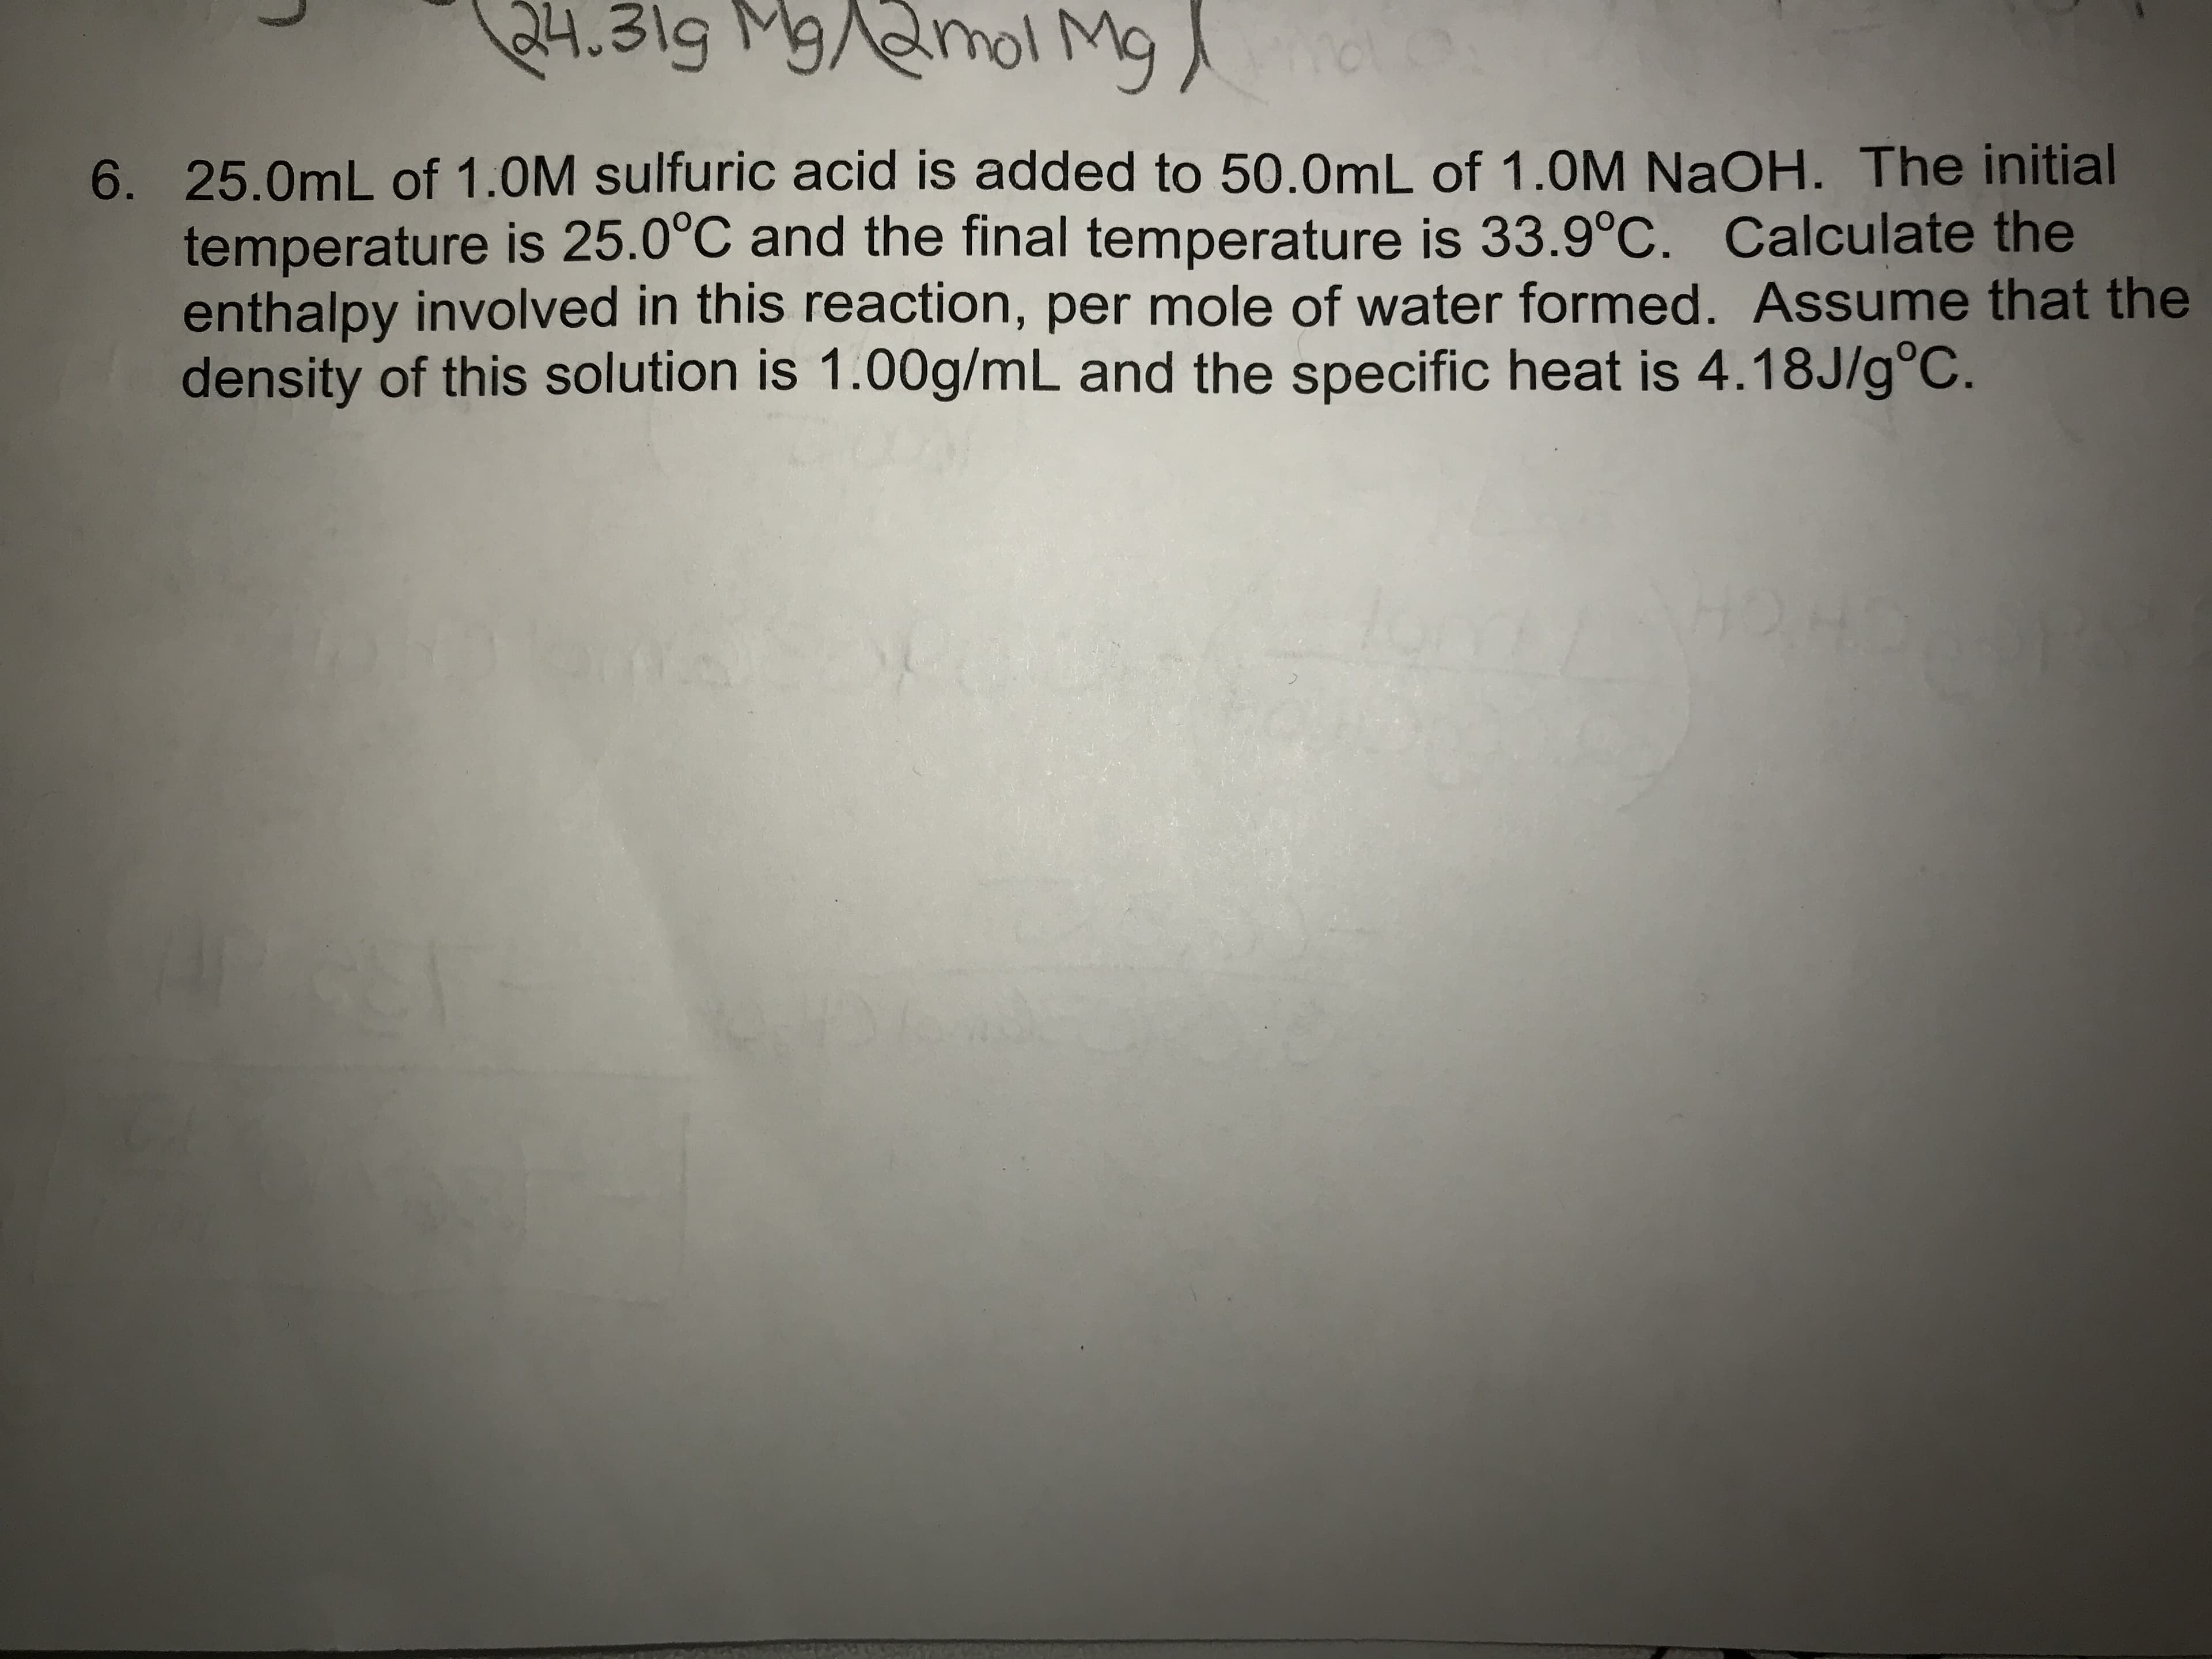 6. 25.0mL of 1.0M sulfuric acid is added to 50.0mL of 1.0M NaOH. The initial
temperature is 25.0°C and the final temperature is 33.9°C. Calculate the
enthalpy involved in this reaction, per mole of water formed. Assume that the
density of this solution is 1.00g/mL and the specific heat is 4.18J/goC.
